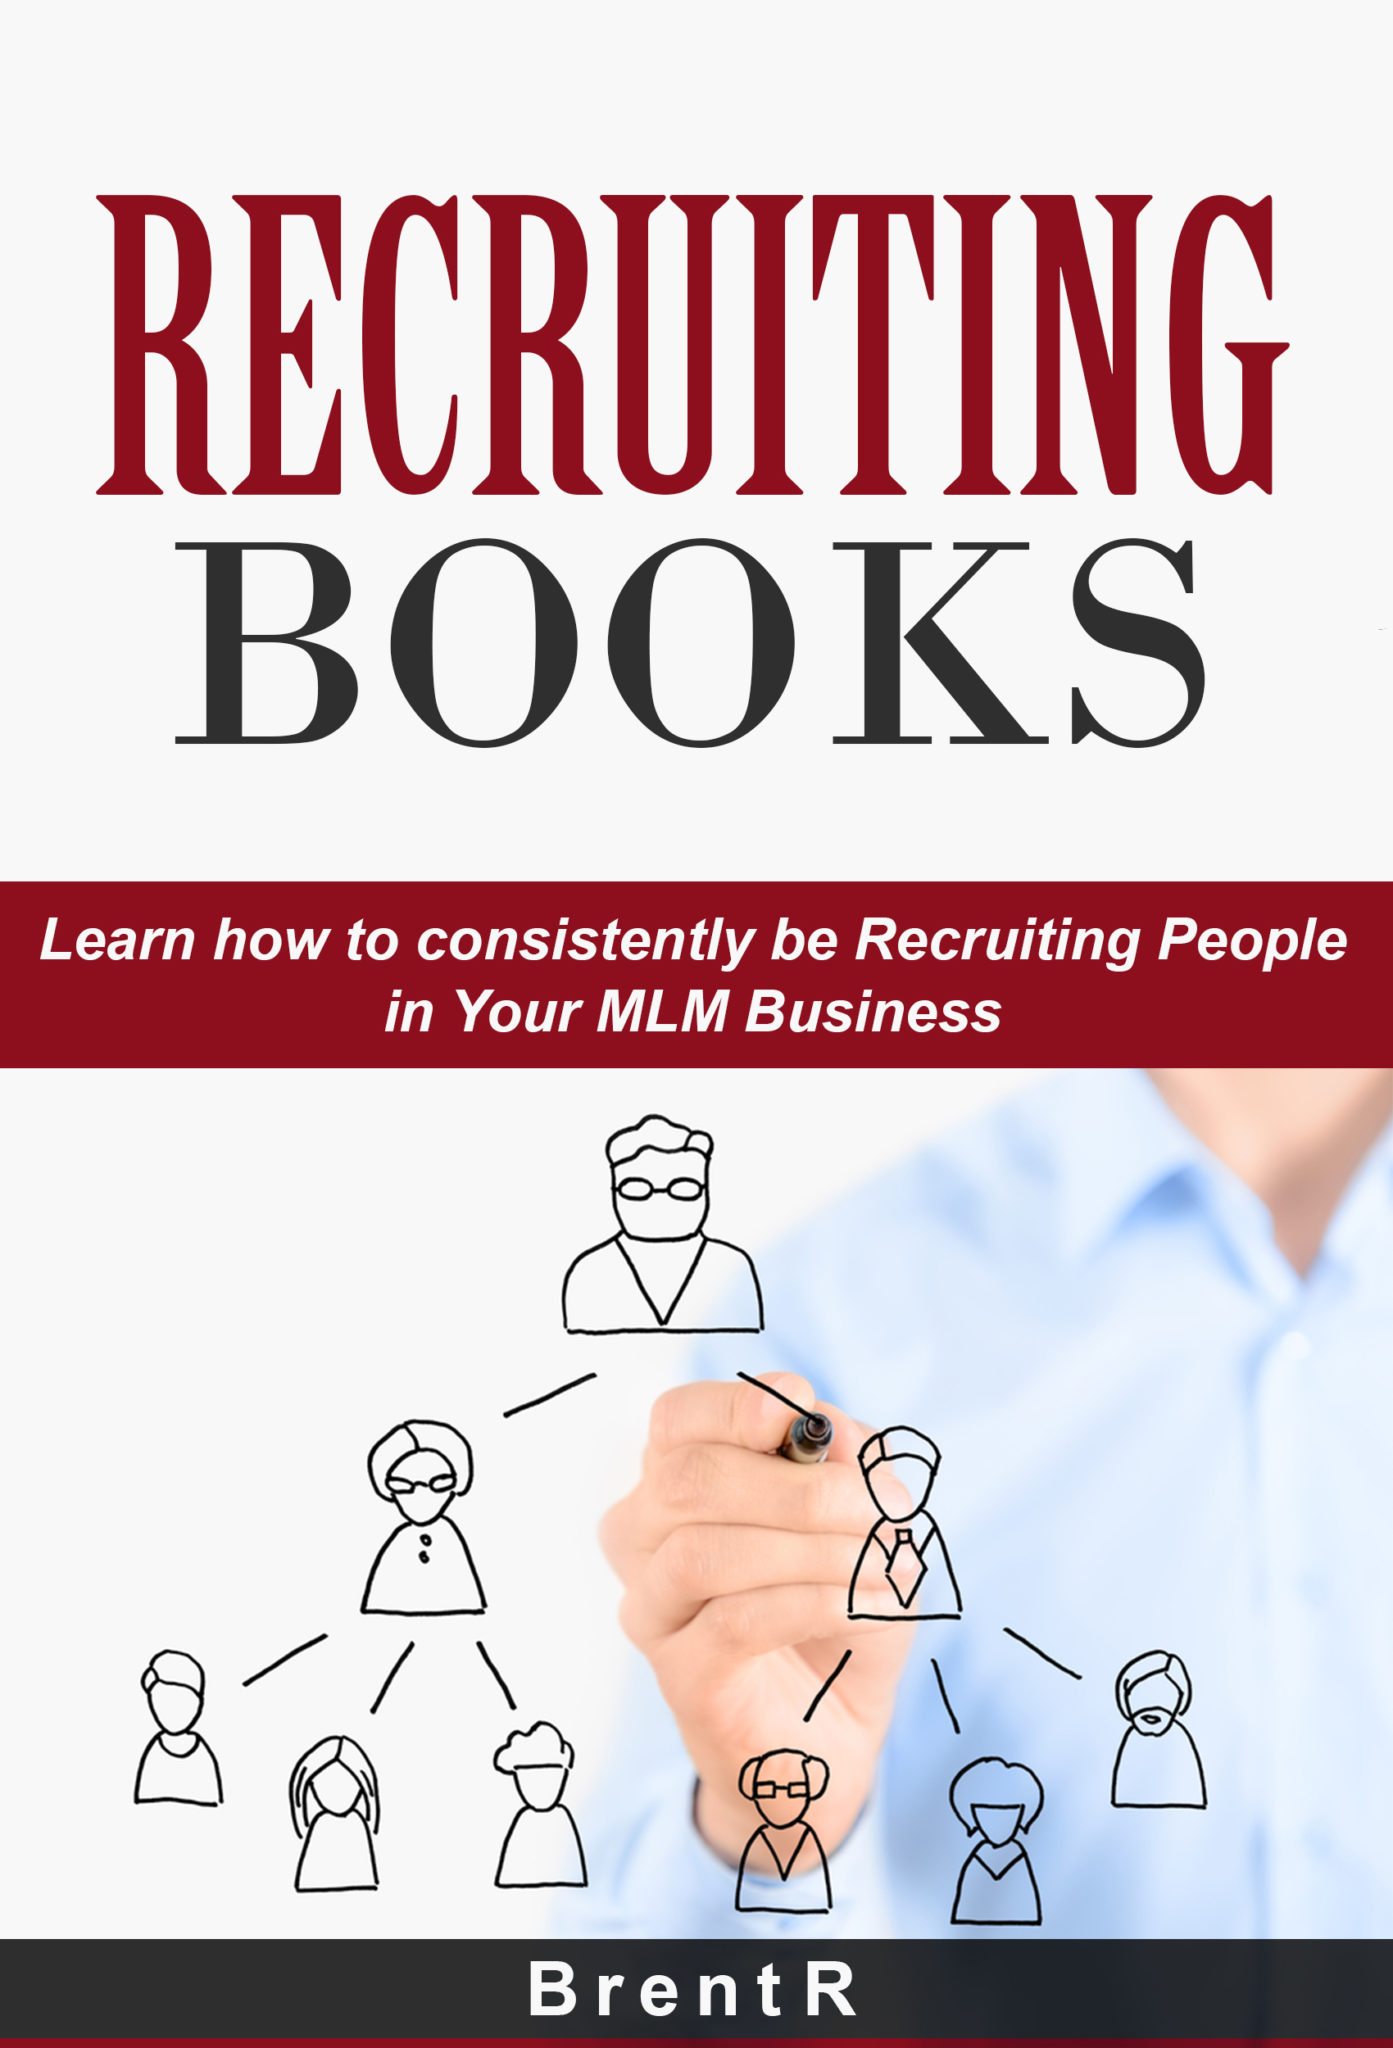 FREE: Recruiting Books: Learn How to Consistently be Recruiting People in your MLM Business by Brent R